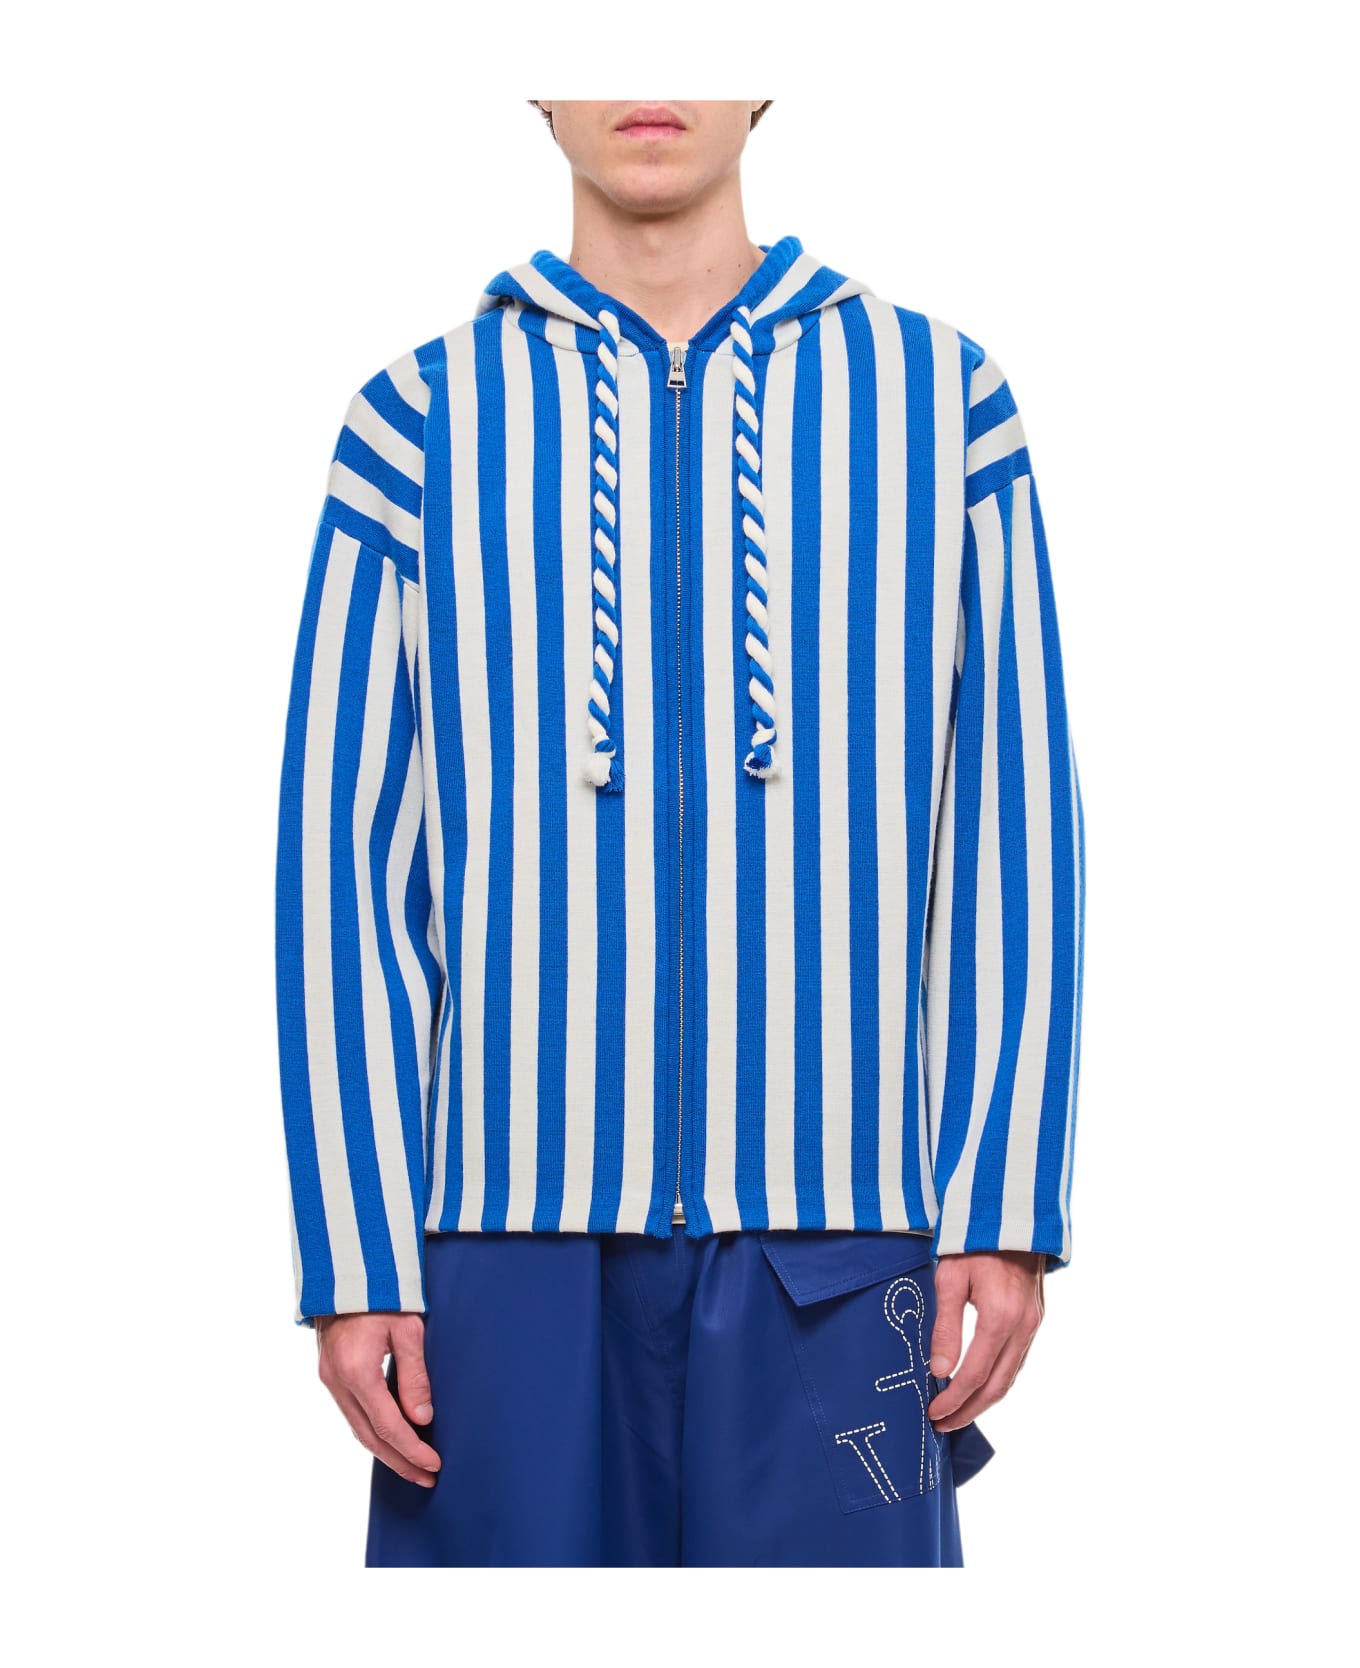 J.W. Anderson Striped Zipped Anchor Hoodie - BLUE/WHITE